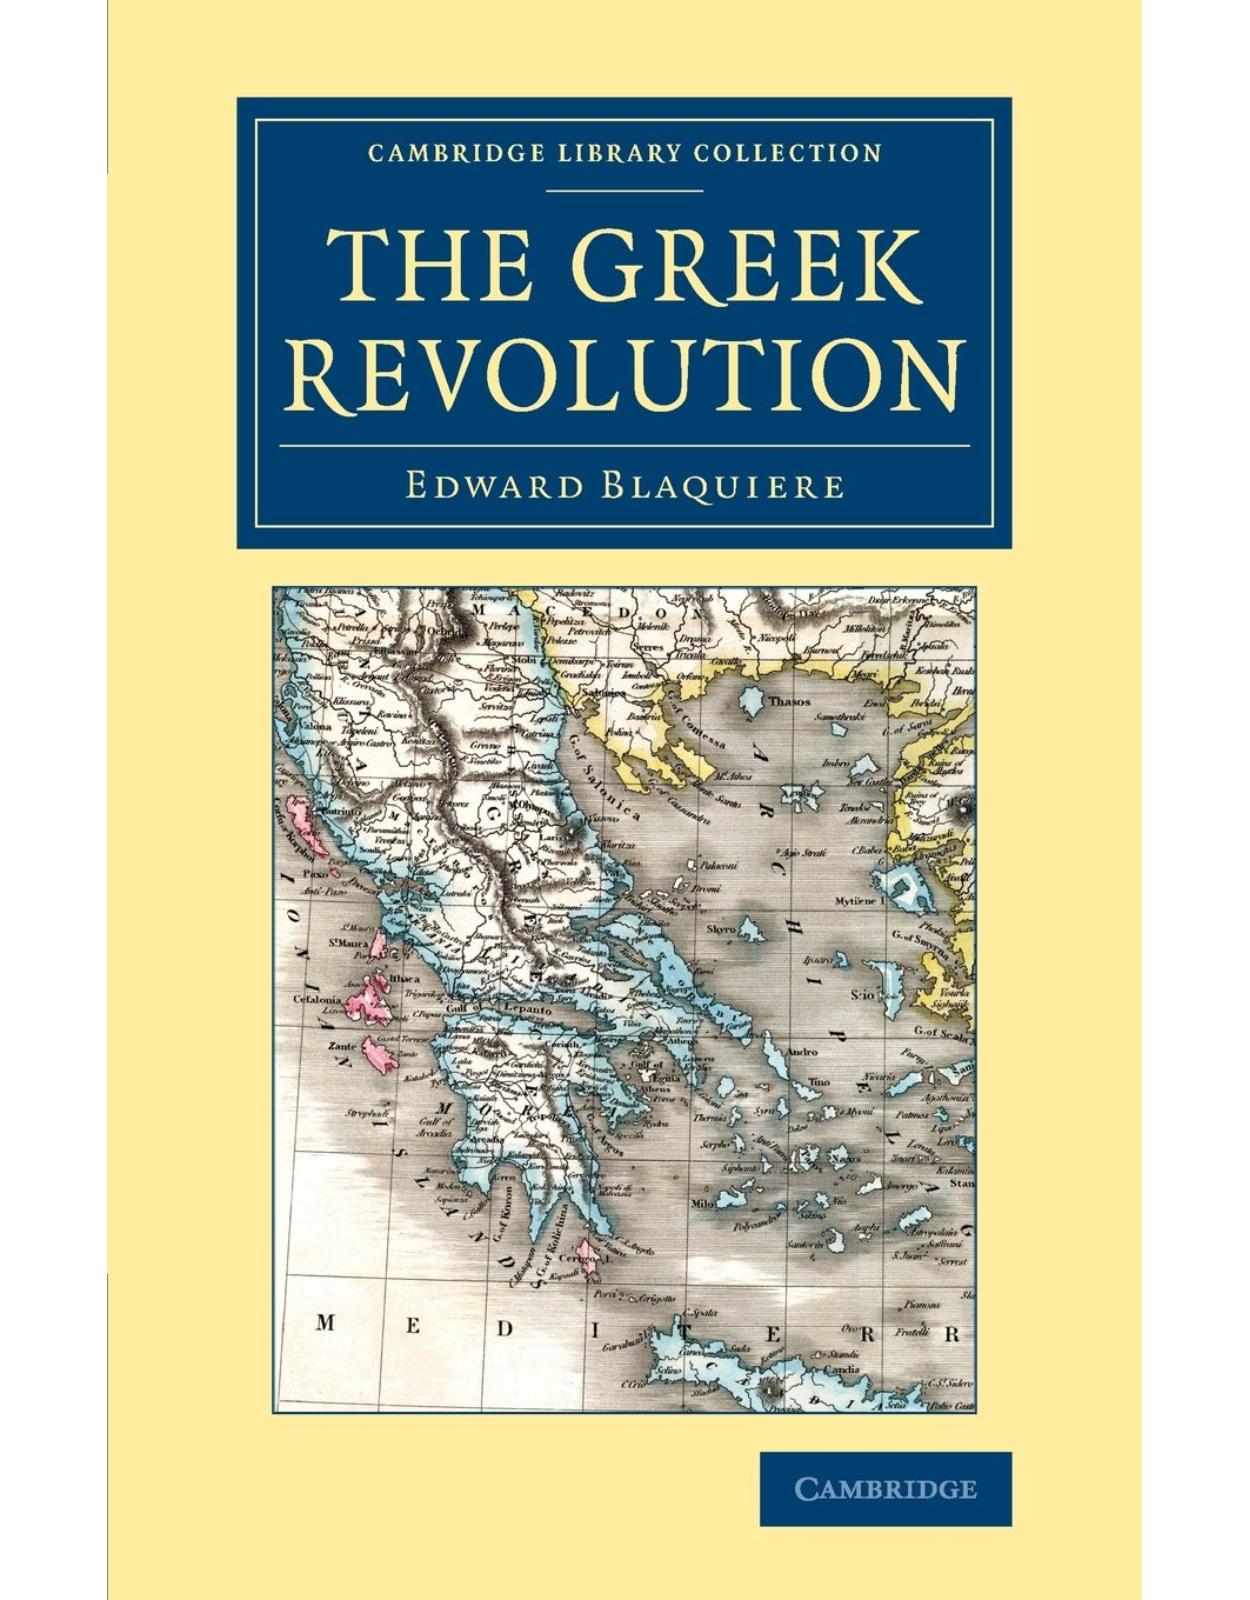 The Greek Revolution: Its Origin and Progress, Together with Some Remarks on the Religion, National Character, &c. in Greece (Cambridge Library Collection - European History) 